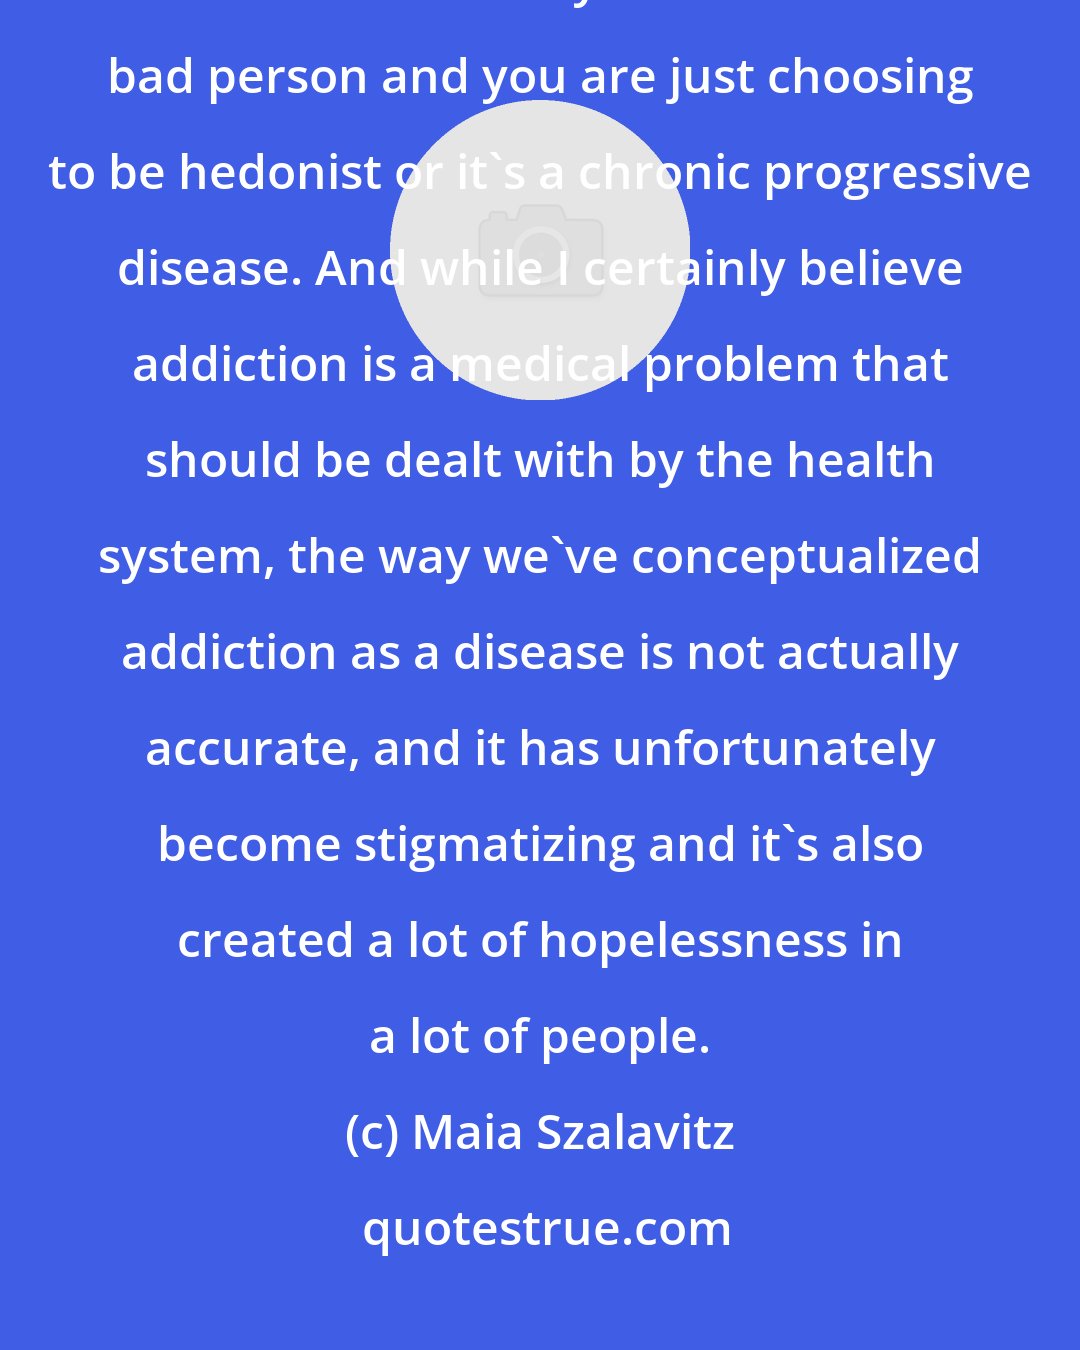 Maia Szalavitz: There's traditionally been two different ways of seeing addiction. Either it's a sin and you're a horrible bad person and you are just choosing to be hedonist or it's a chronic progressive disease. And while I certainly believe addiction is a medical problem that should be dealt with by the health system, the way we've conceptualized addiction as a disease is not actually accurate, and it has unfortunately become stigmatizing and it's also created a lot of hopelessness in a lot of people.